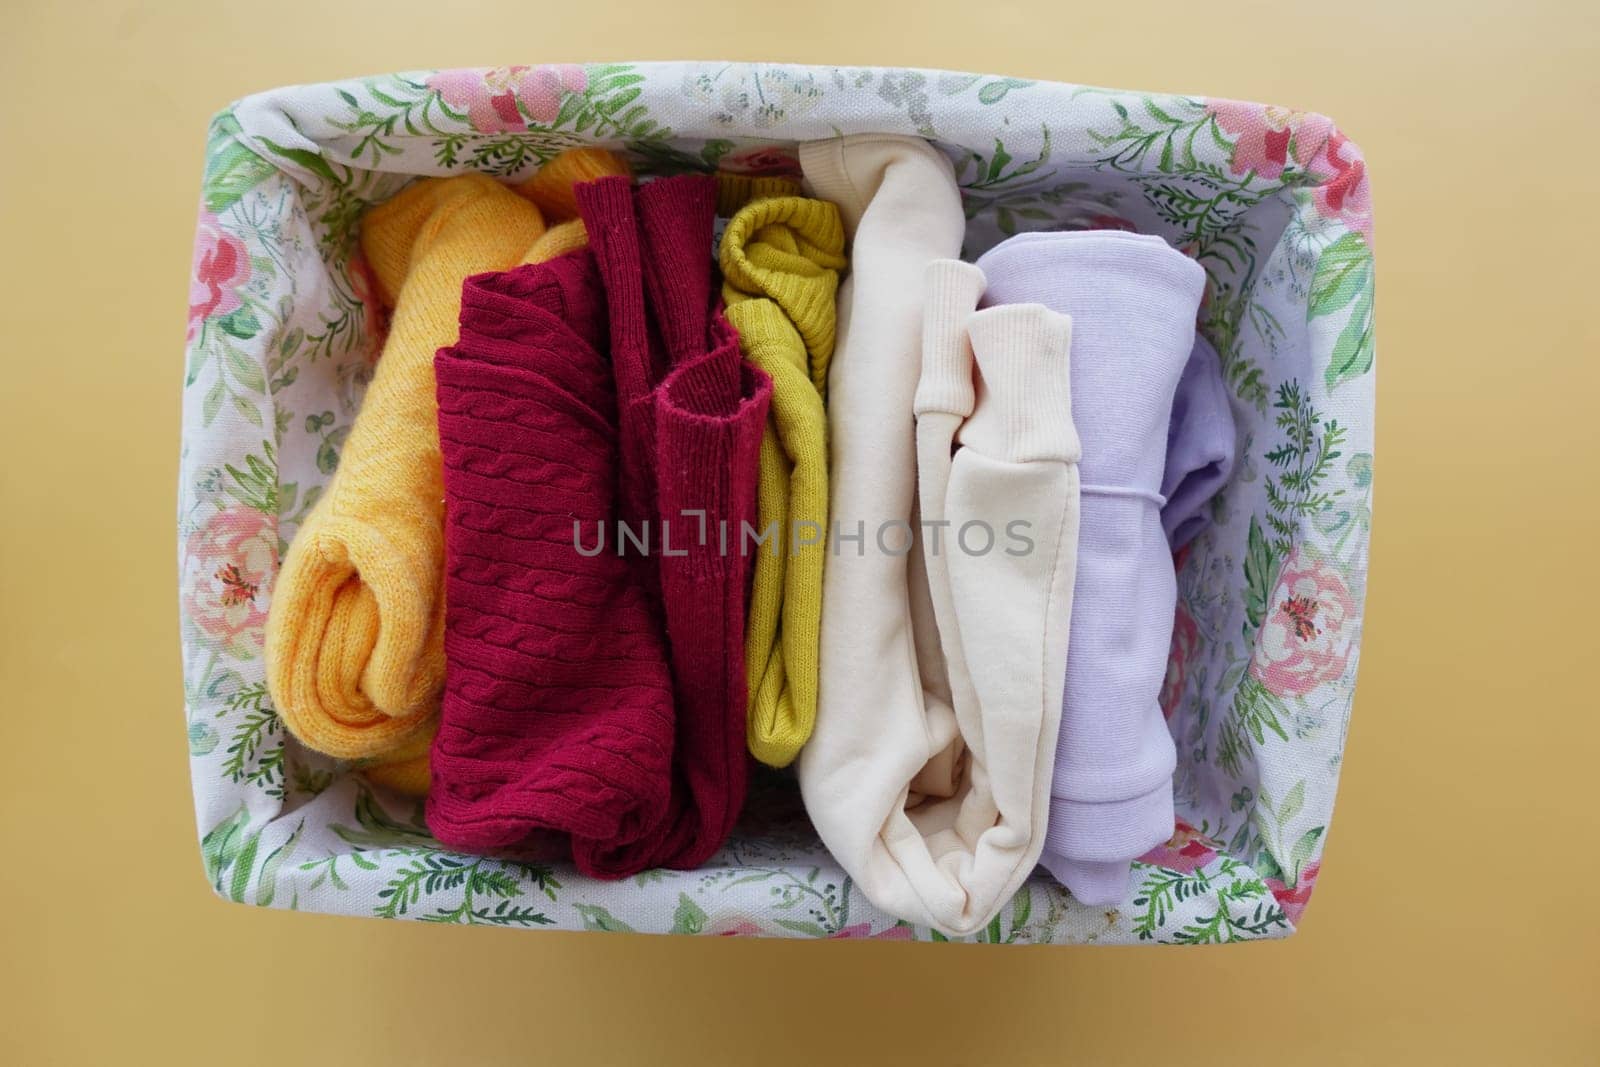 A rectangle violet basket of kid cloths on the table by towfiq007